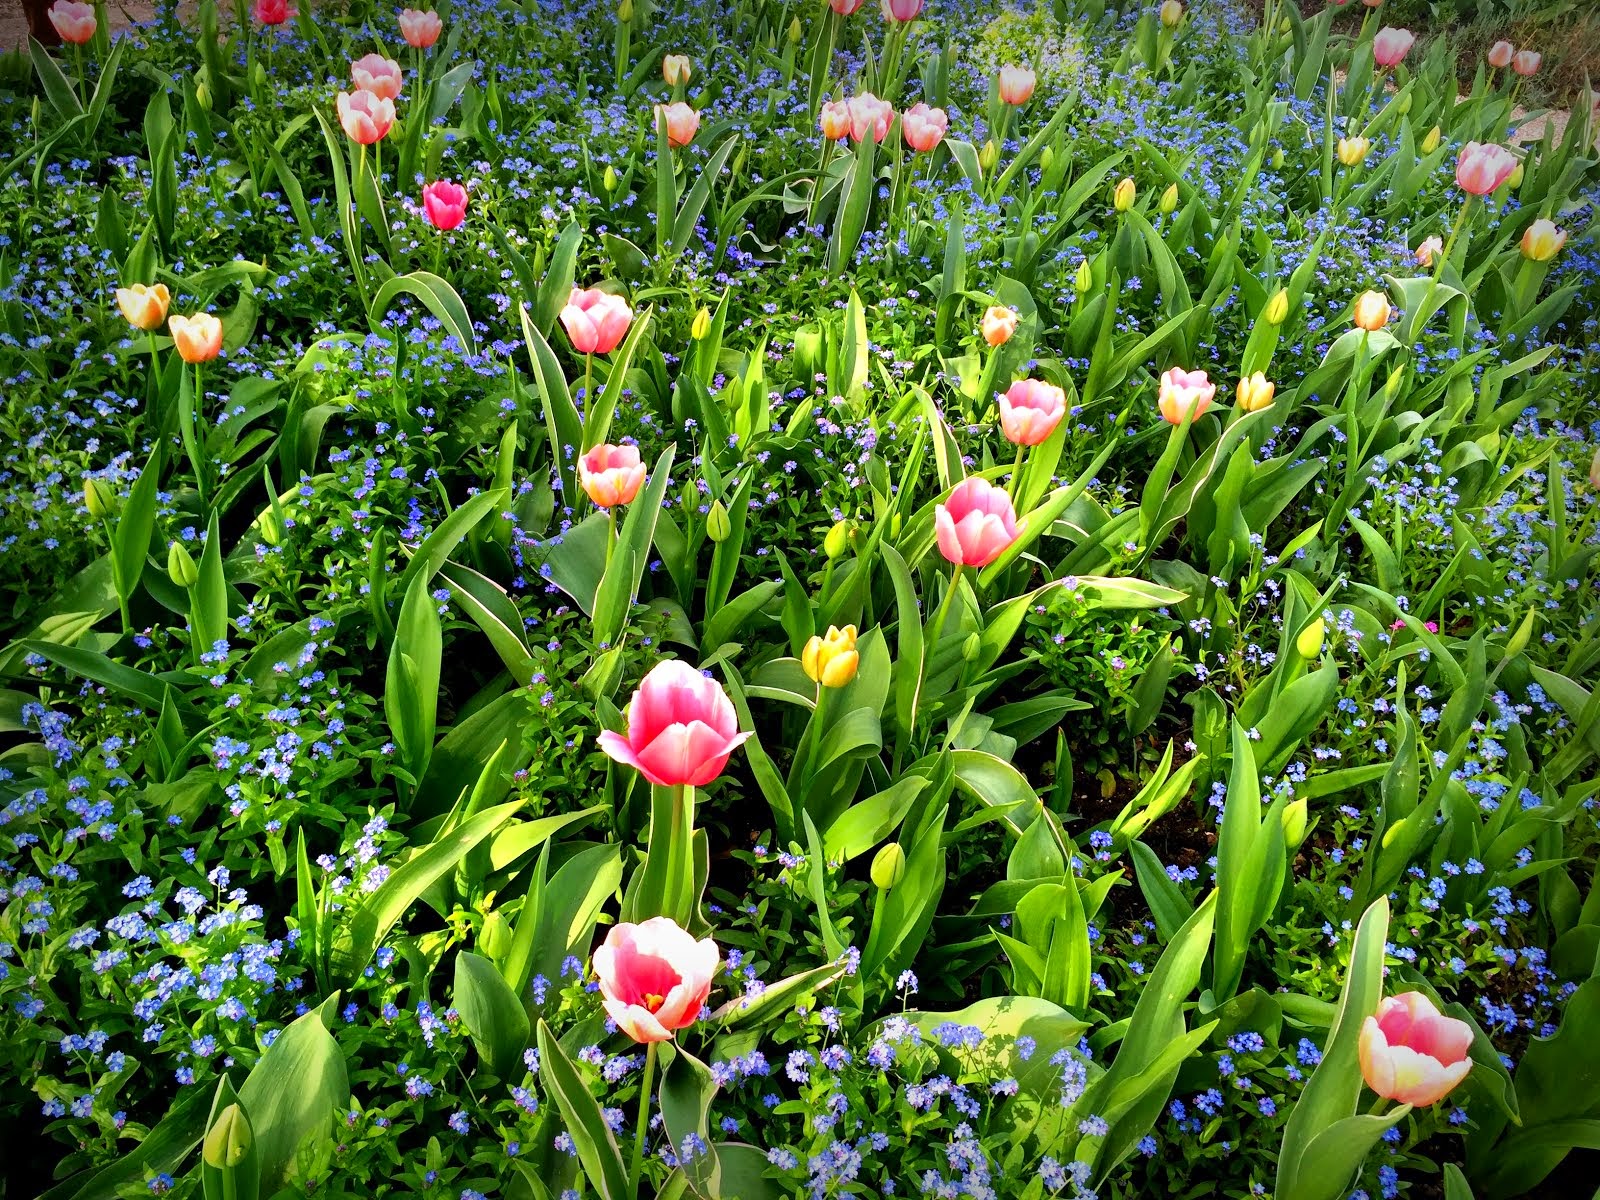 Tulips in Monet's gardens, Giverny, mid April